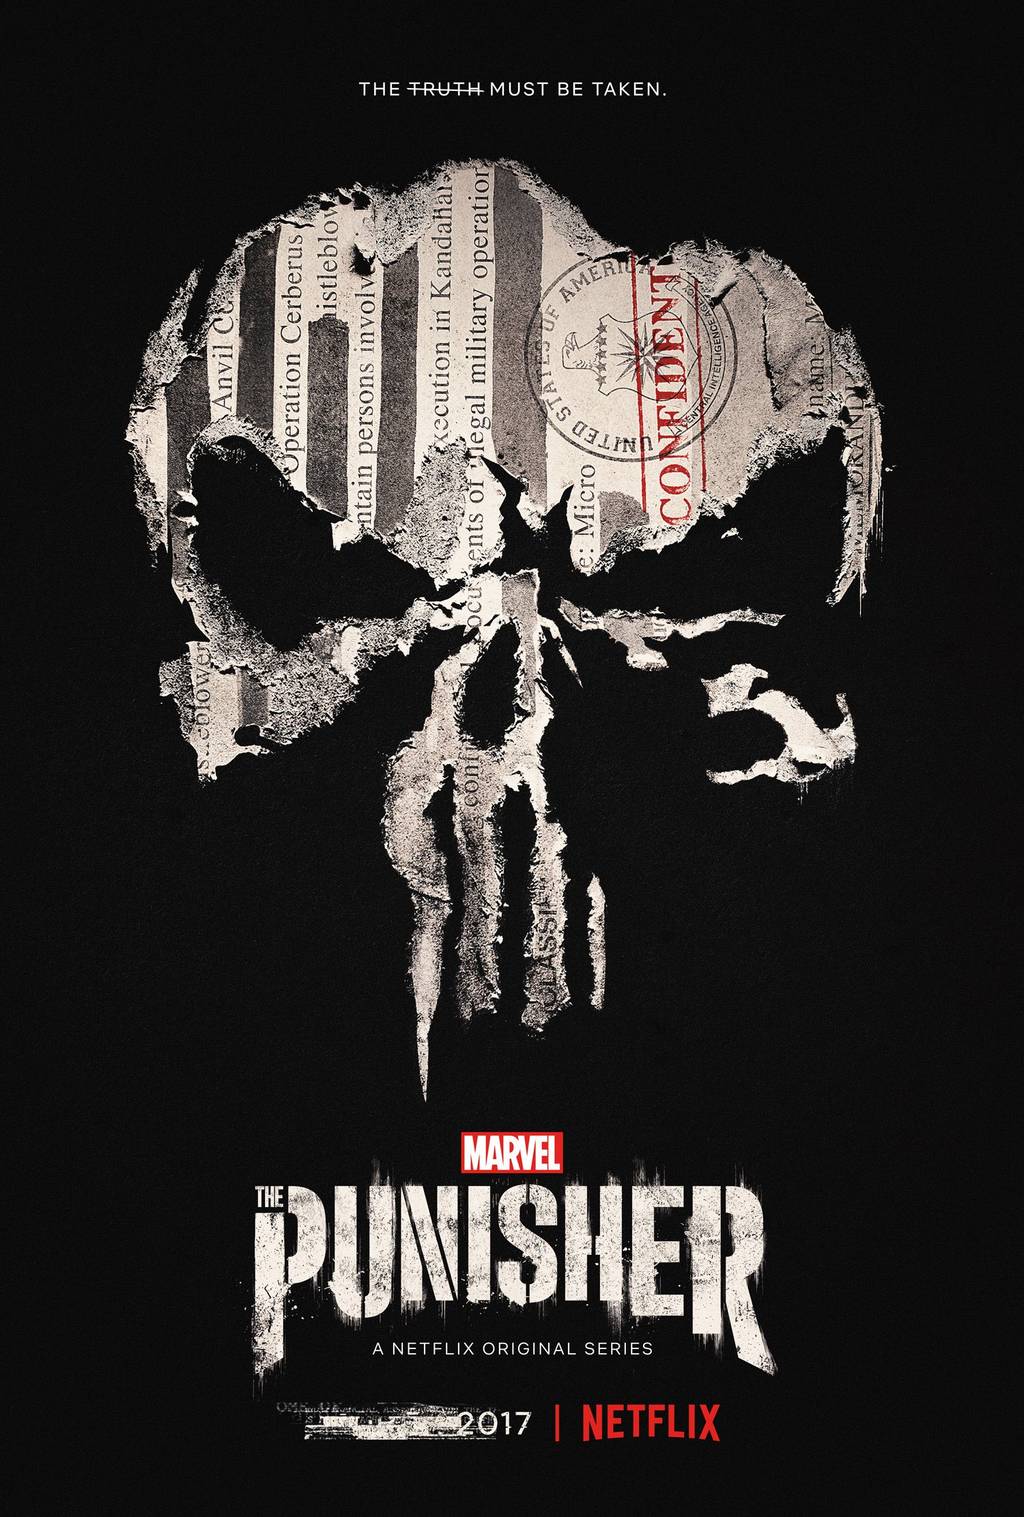 The-Punisher-Poster-Redacted-Release-Date.jpg